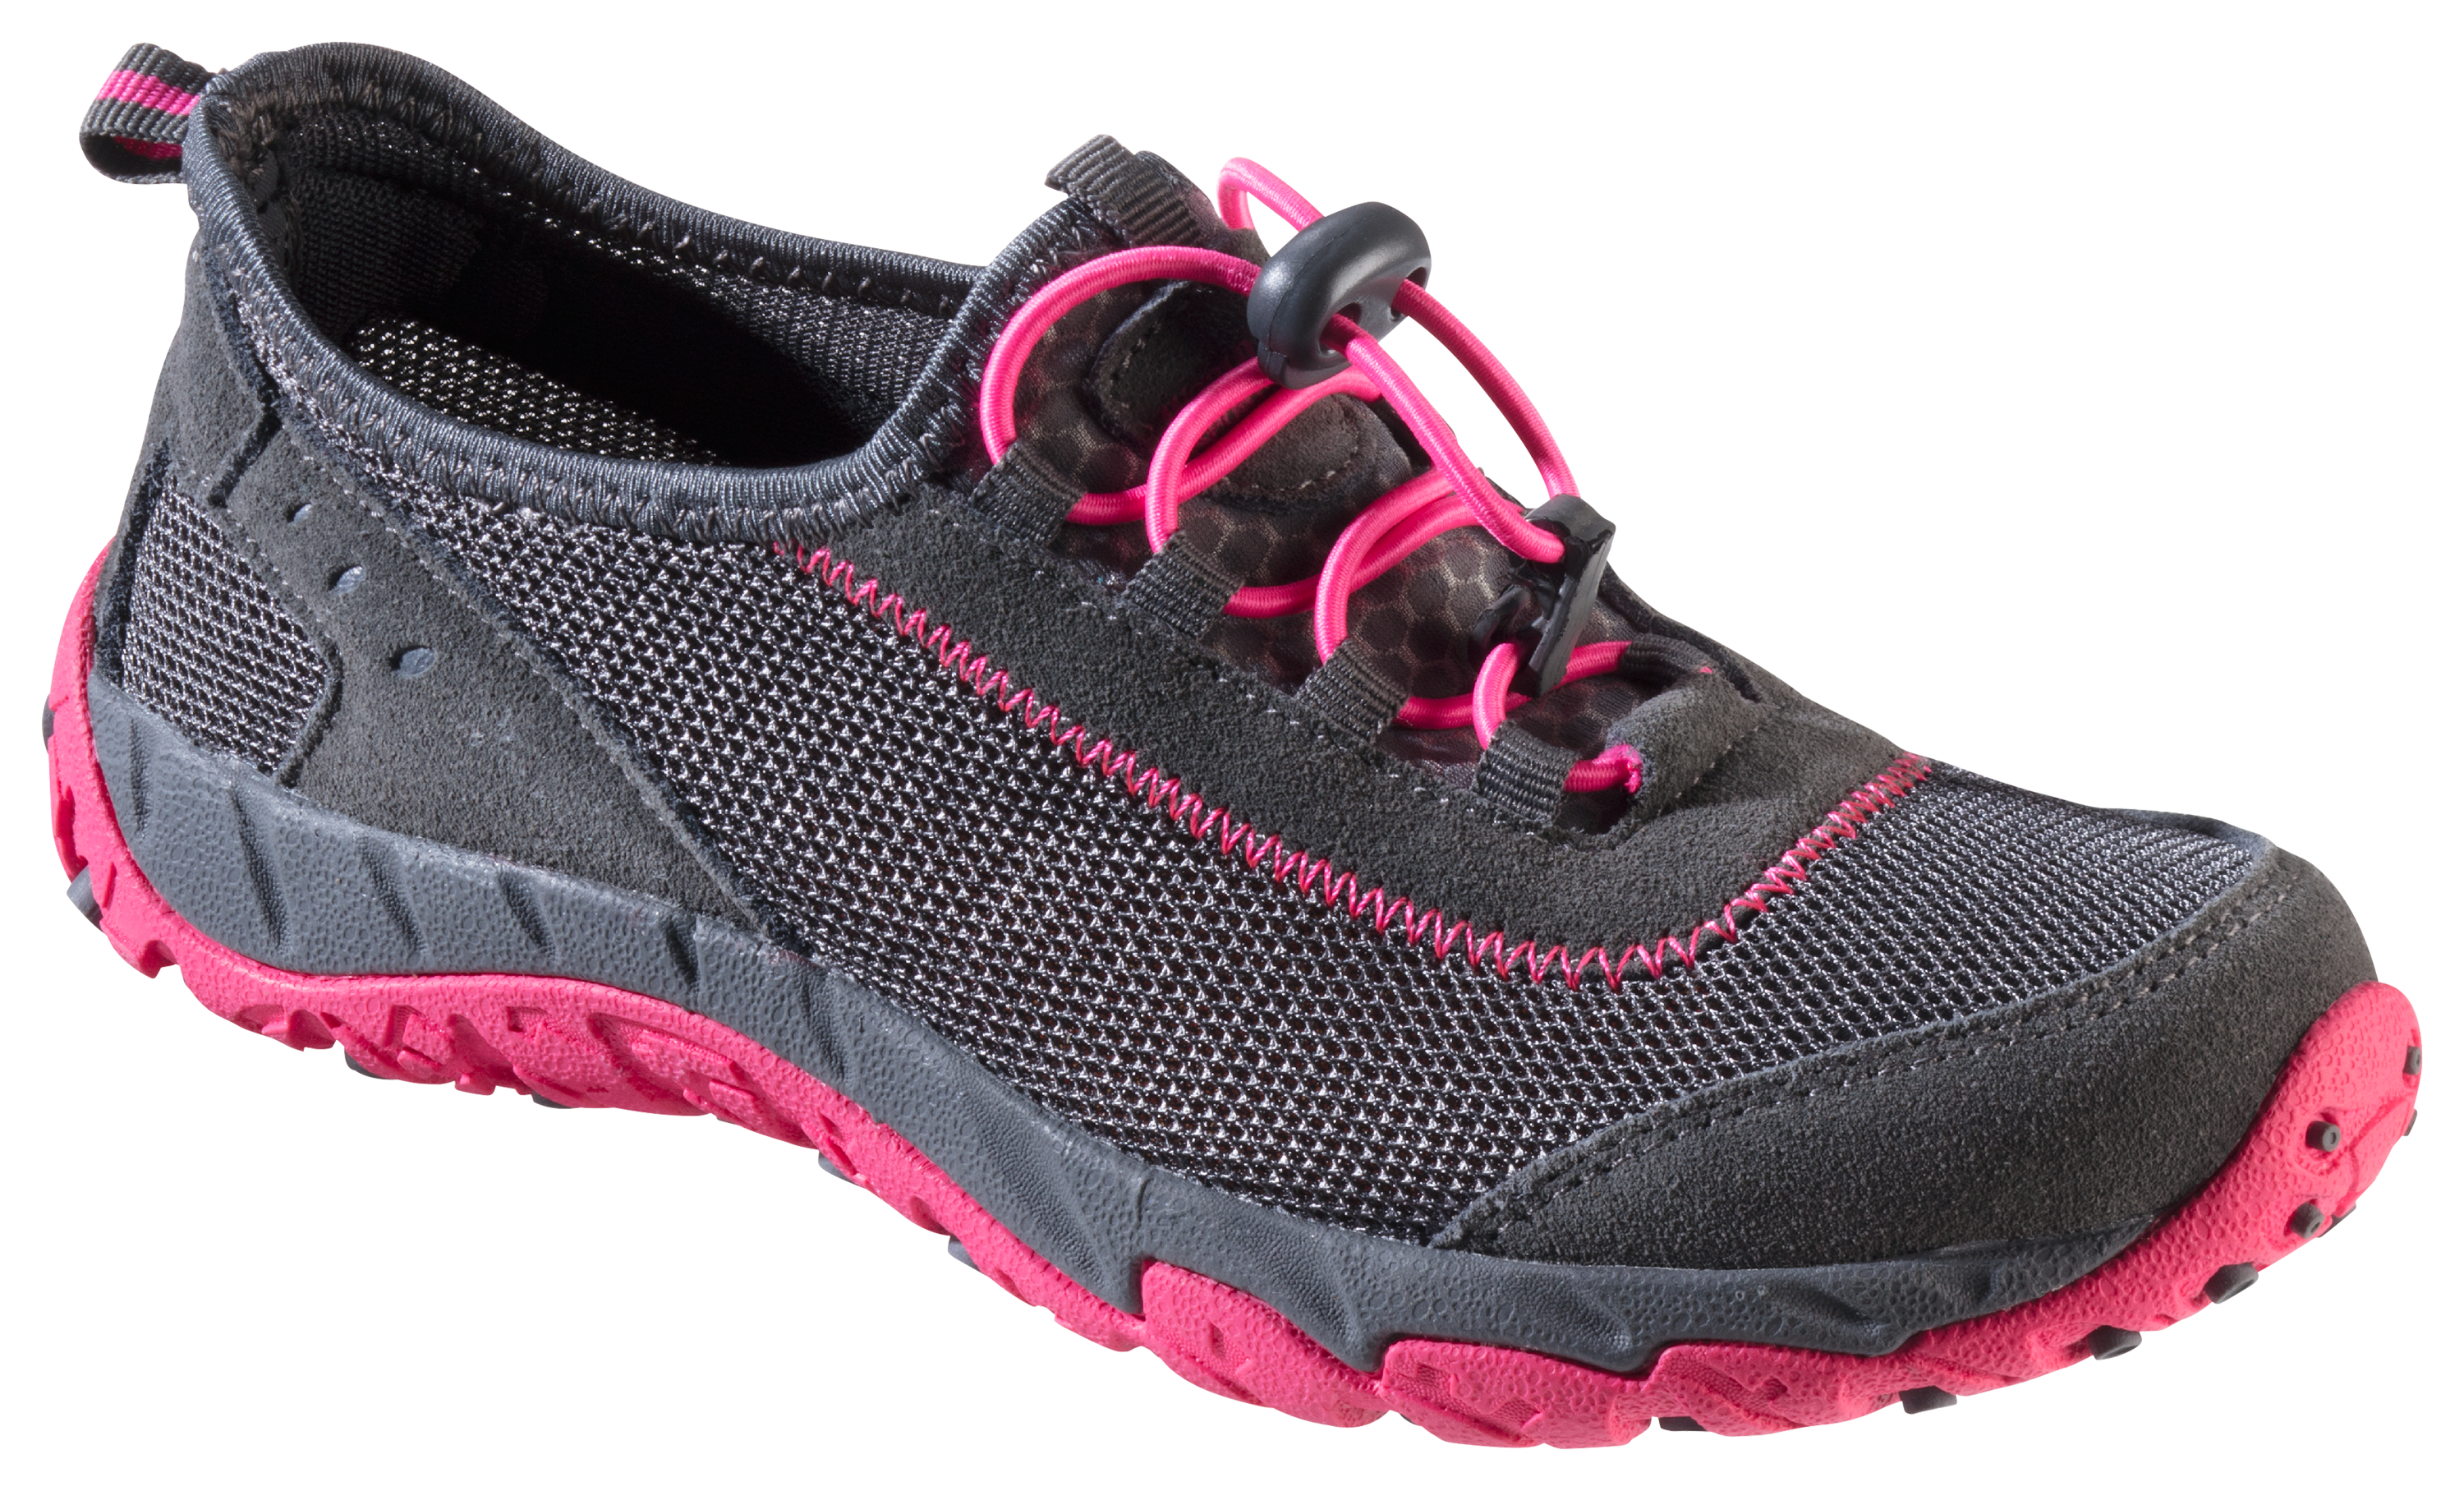 World Wide Sportsman Clear Creek Water Shoes for Ladies - Grey/Pink - 10 M